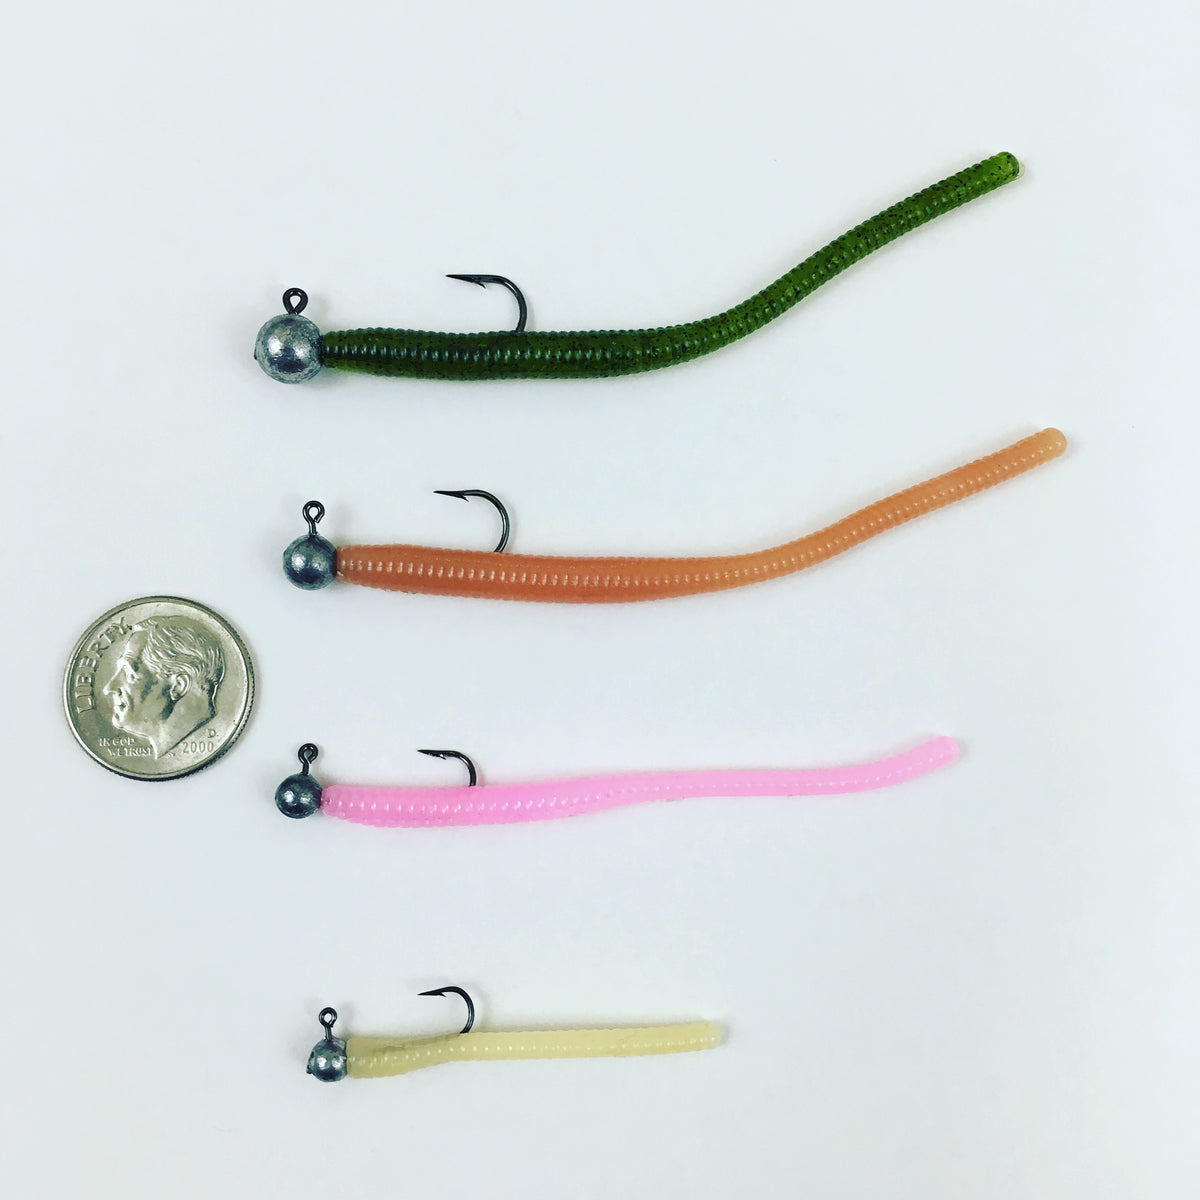 3 CUSTOM FINESSE FLOATING TROUT WORMS (30-PACK) TROUT SALMON BASS